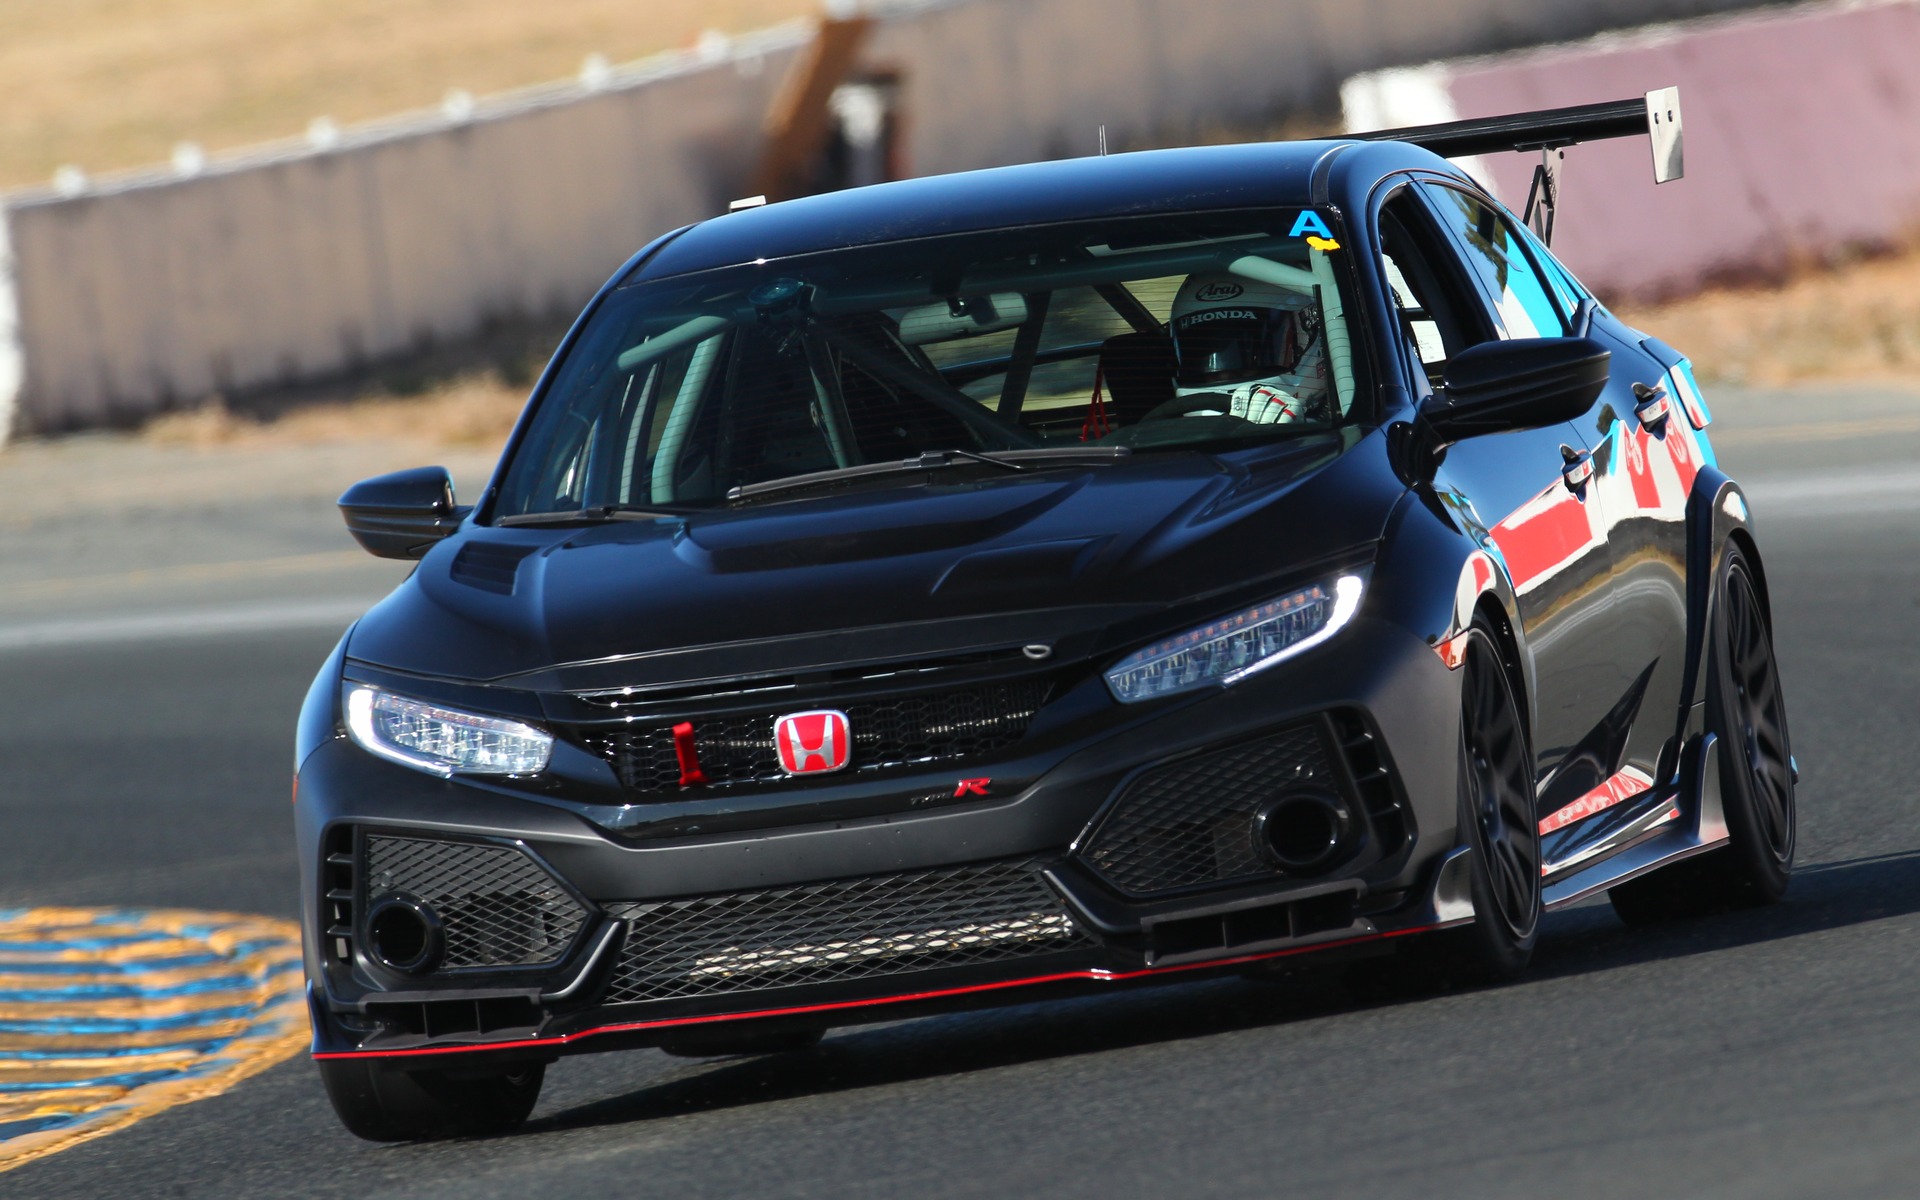 Honda Civic Type R Limited Edition Announced For 21 The Car Guide